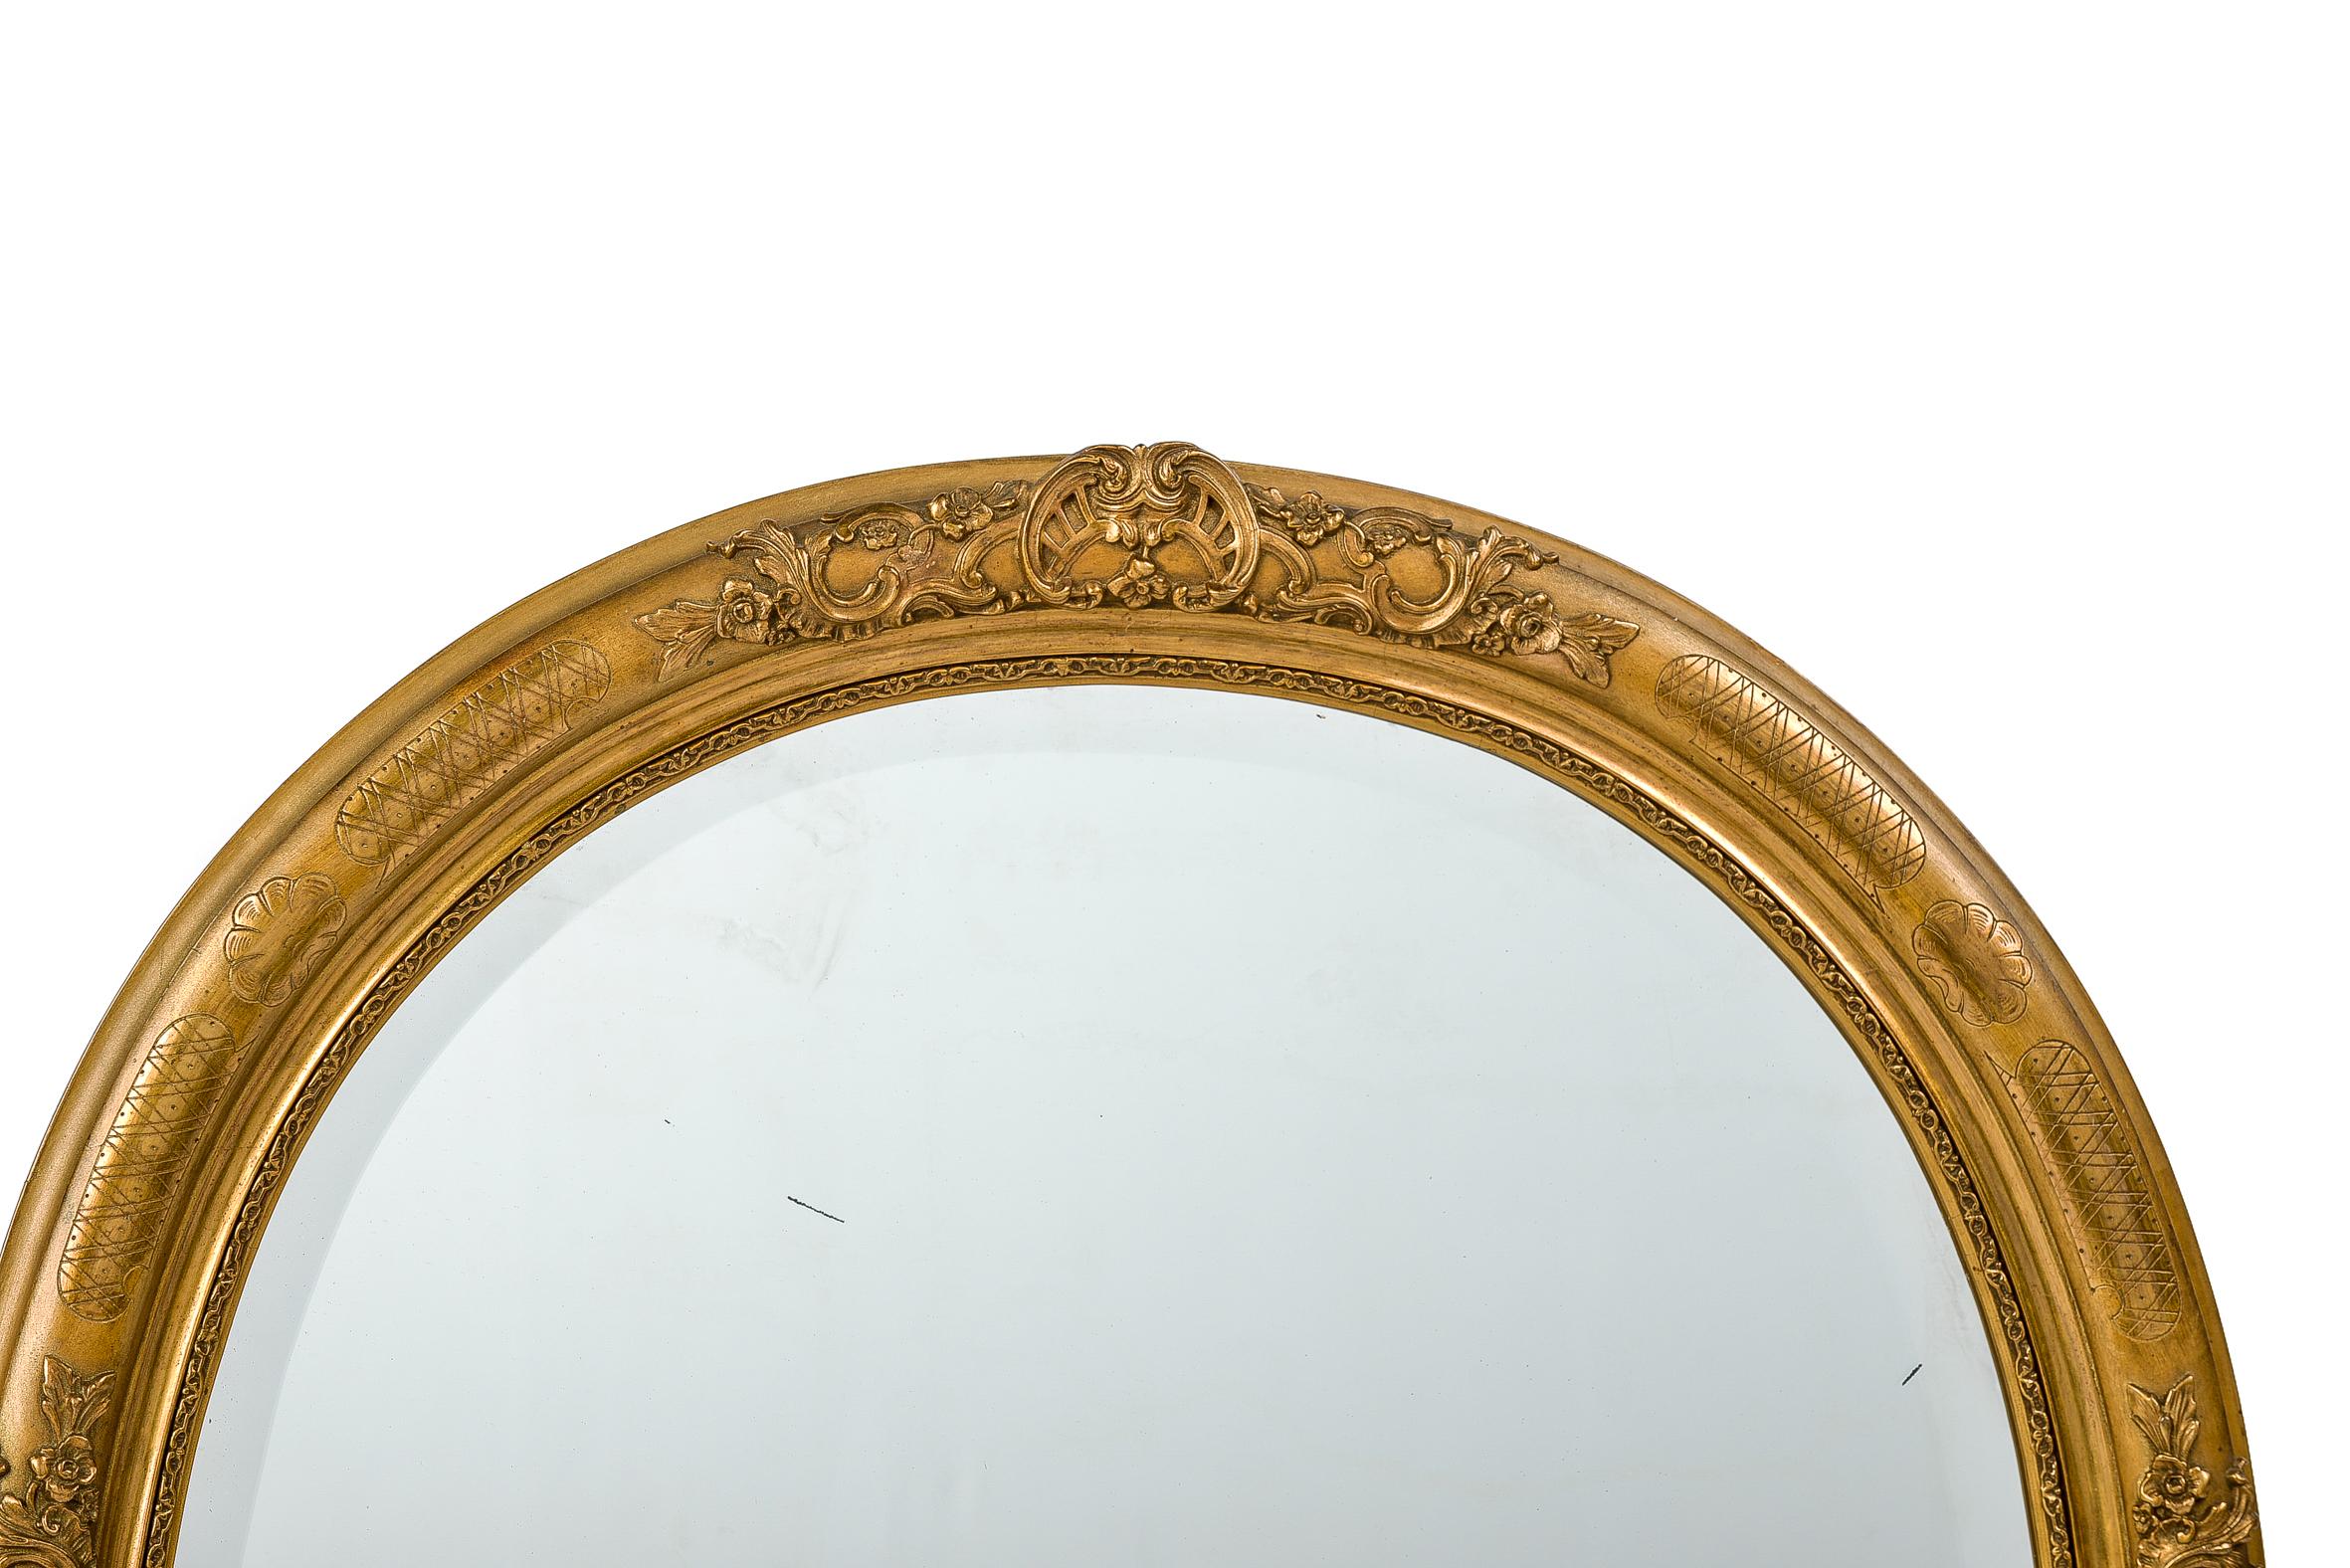 A beautiful antique French oval mirror that was made in France, circa 1890. 
The mirror frame is adorned with highly detailed ornaments that depict scrolls, acanthus, flowers, and leaves. 
The most elevated part of the frame has floral and cross